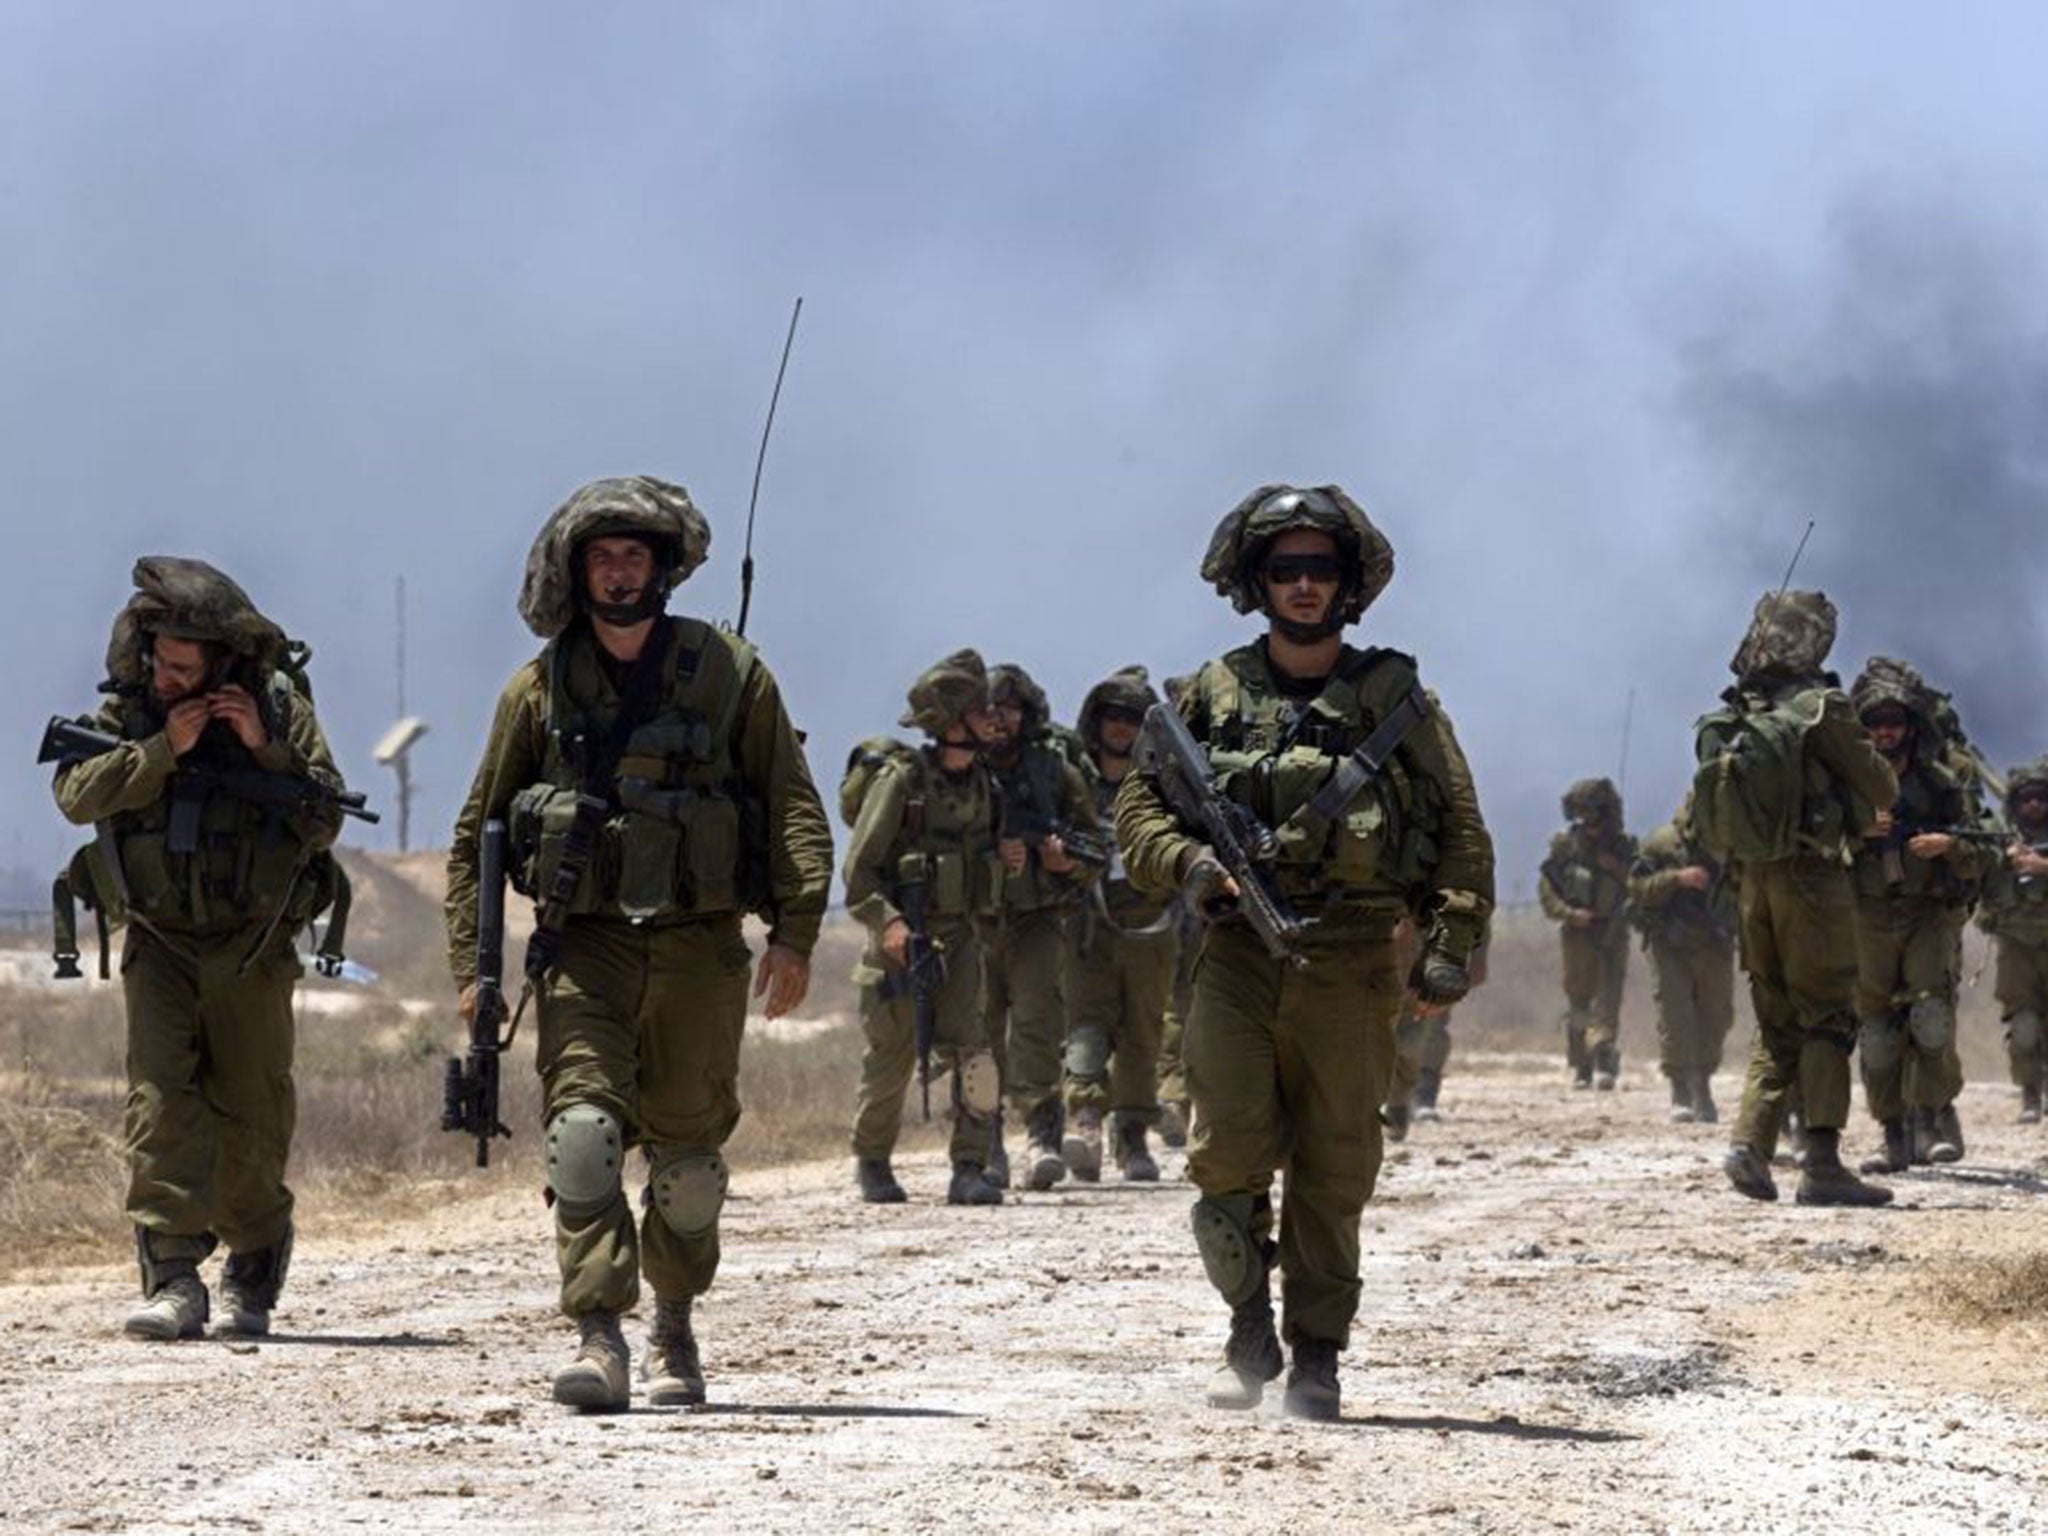 IDF troops on patrol along Israel's border with the Gaza strip